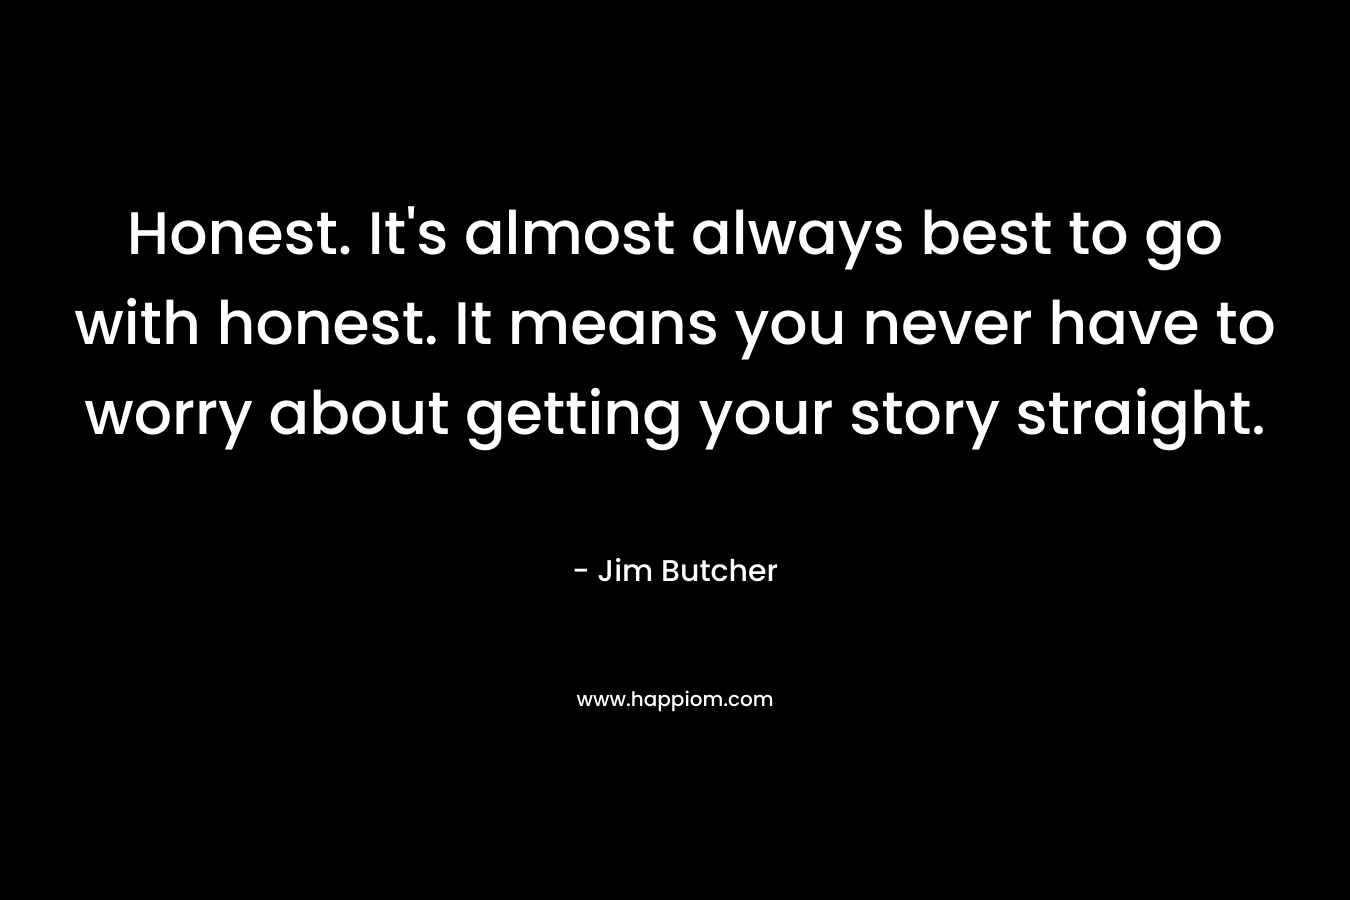 Honest. It's almost always best to go with honest. It means you never have to worry about getting your story straight.